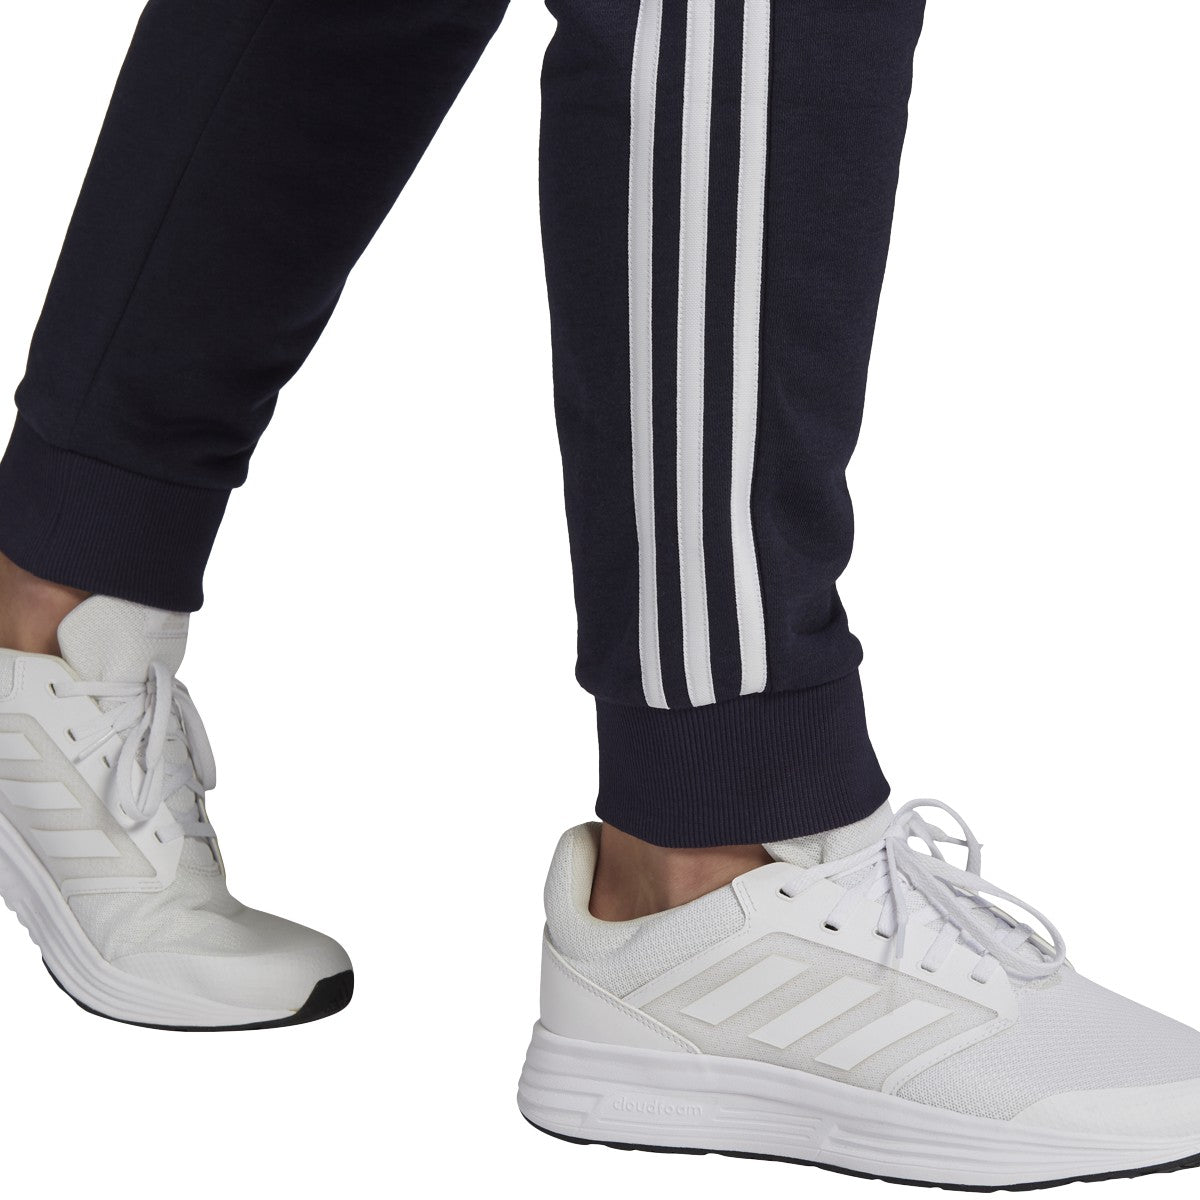 Adidas Women's 3 Stripe French Terry Core Pant (Legend Ink/White, Size L)